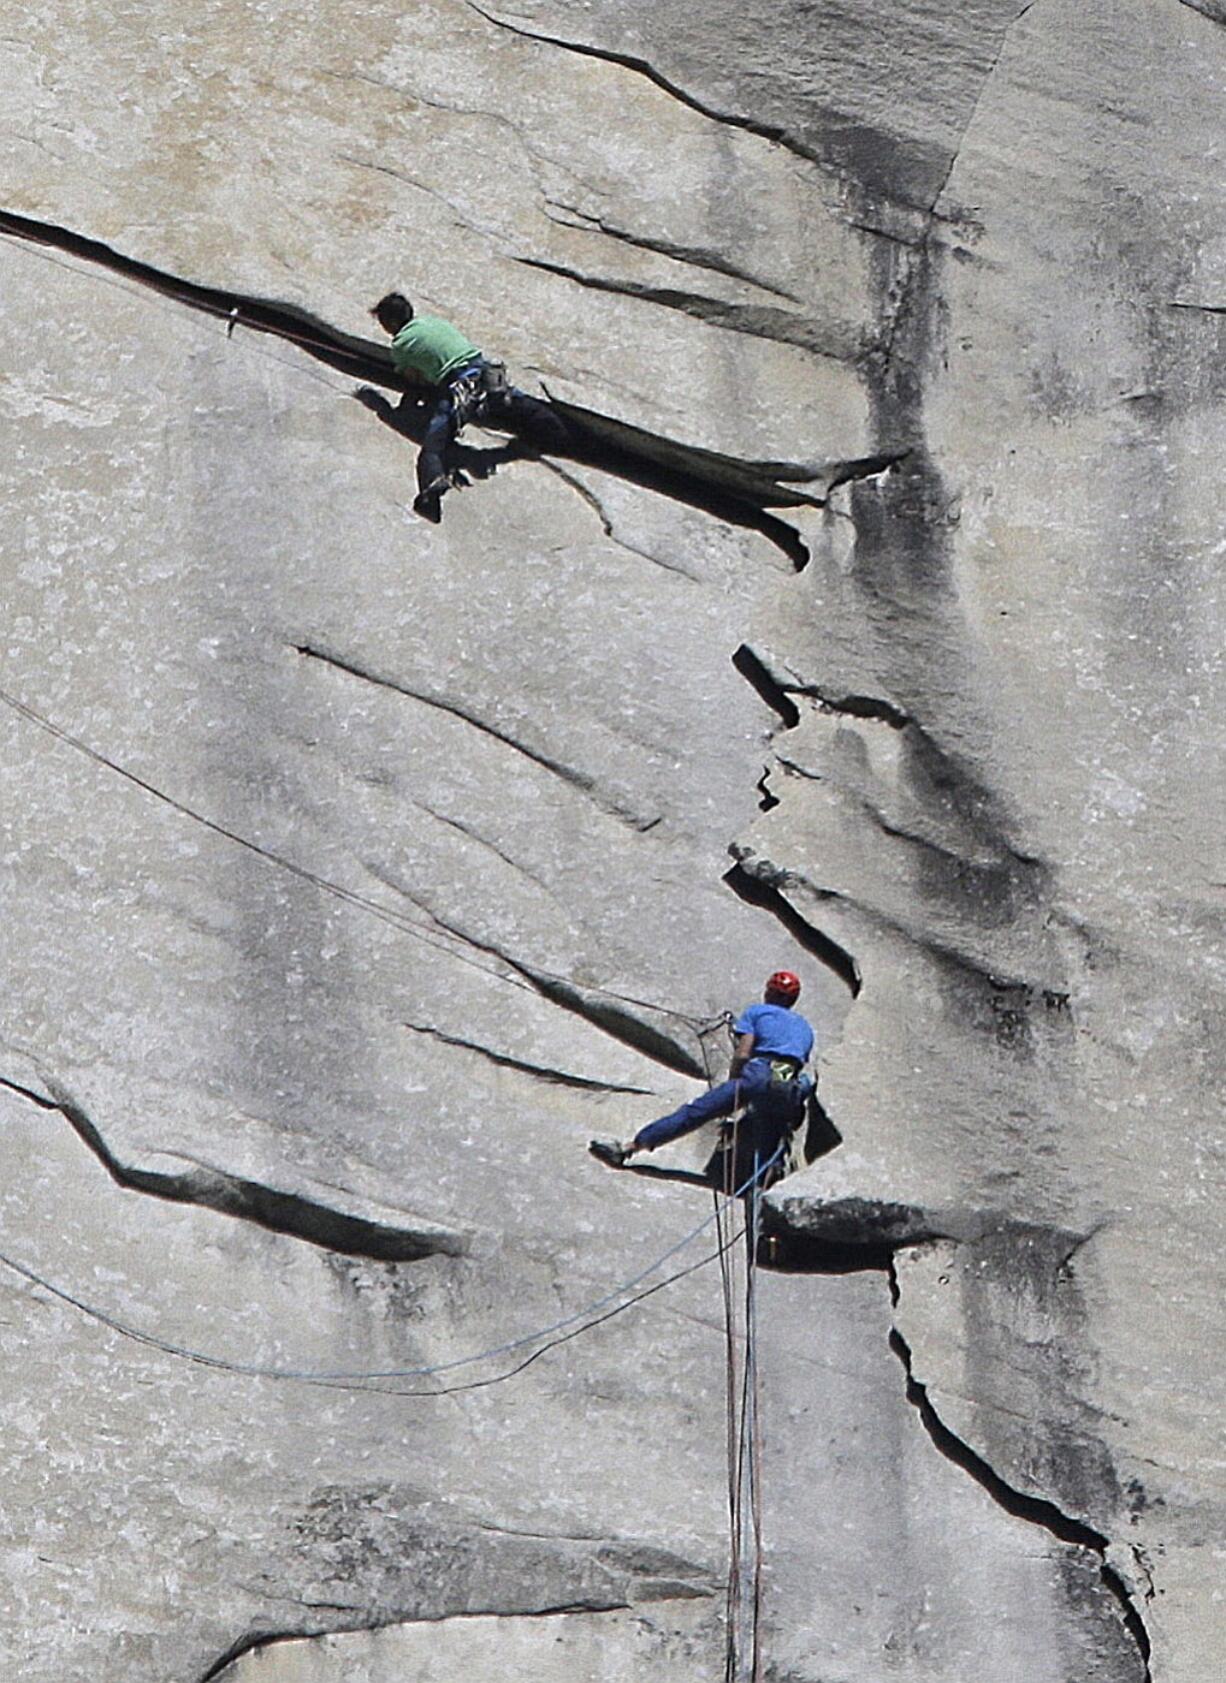 Photos by BEN MARGOT/Associated Press
Kevin Jorgeson, wearing green, and Tommy Caldwell, wearing blue, near the summit of El Capitan on Wednesday in Yosemite National Park, Calif.